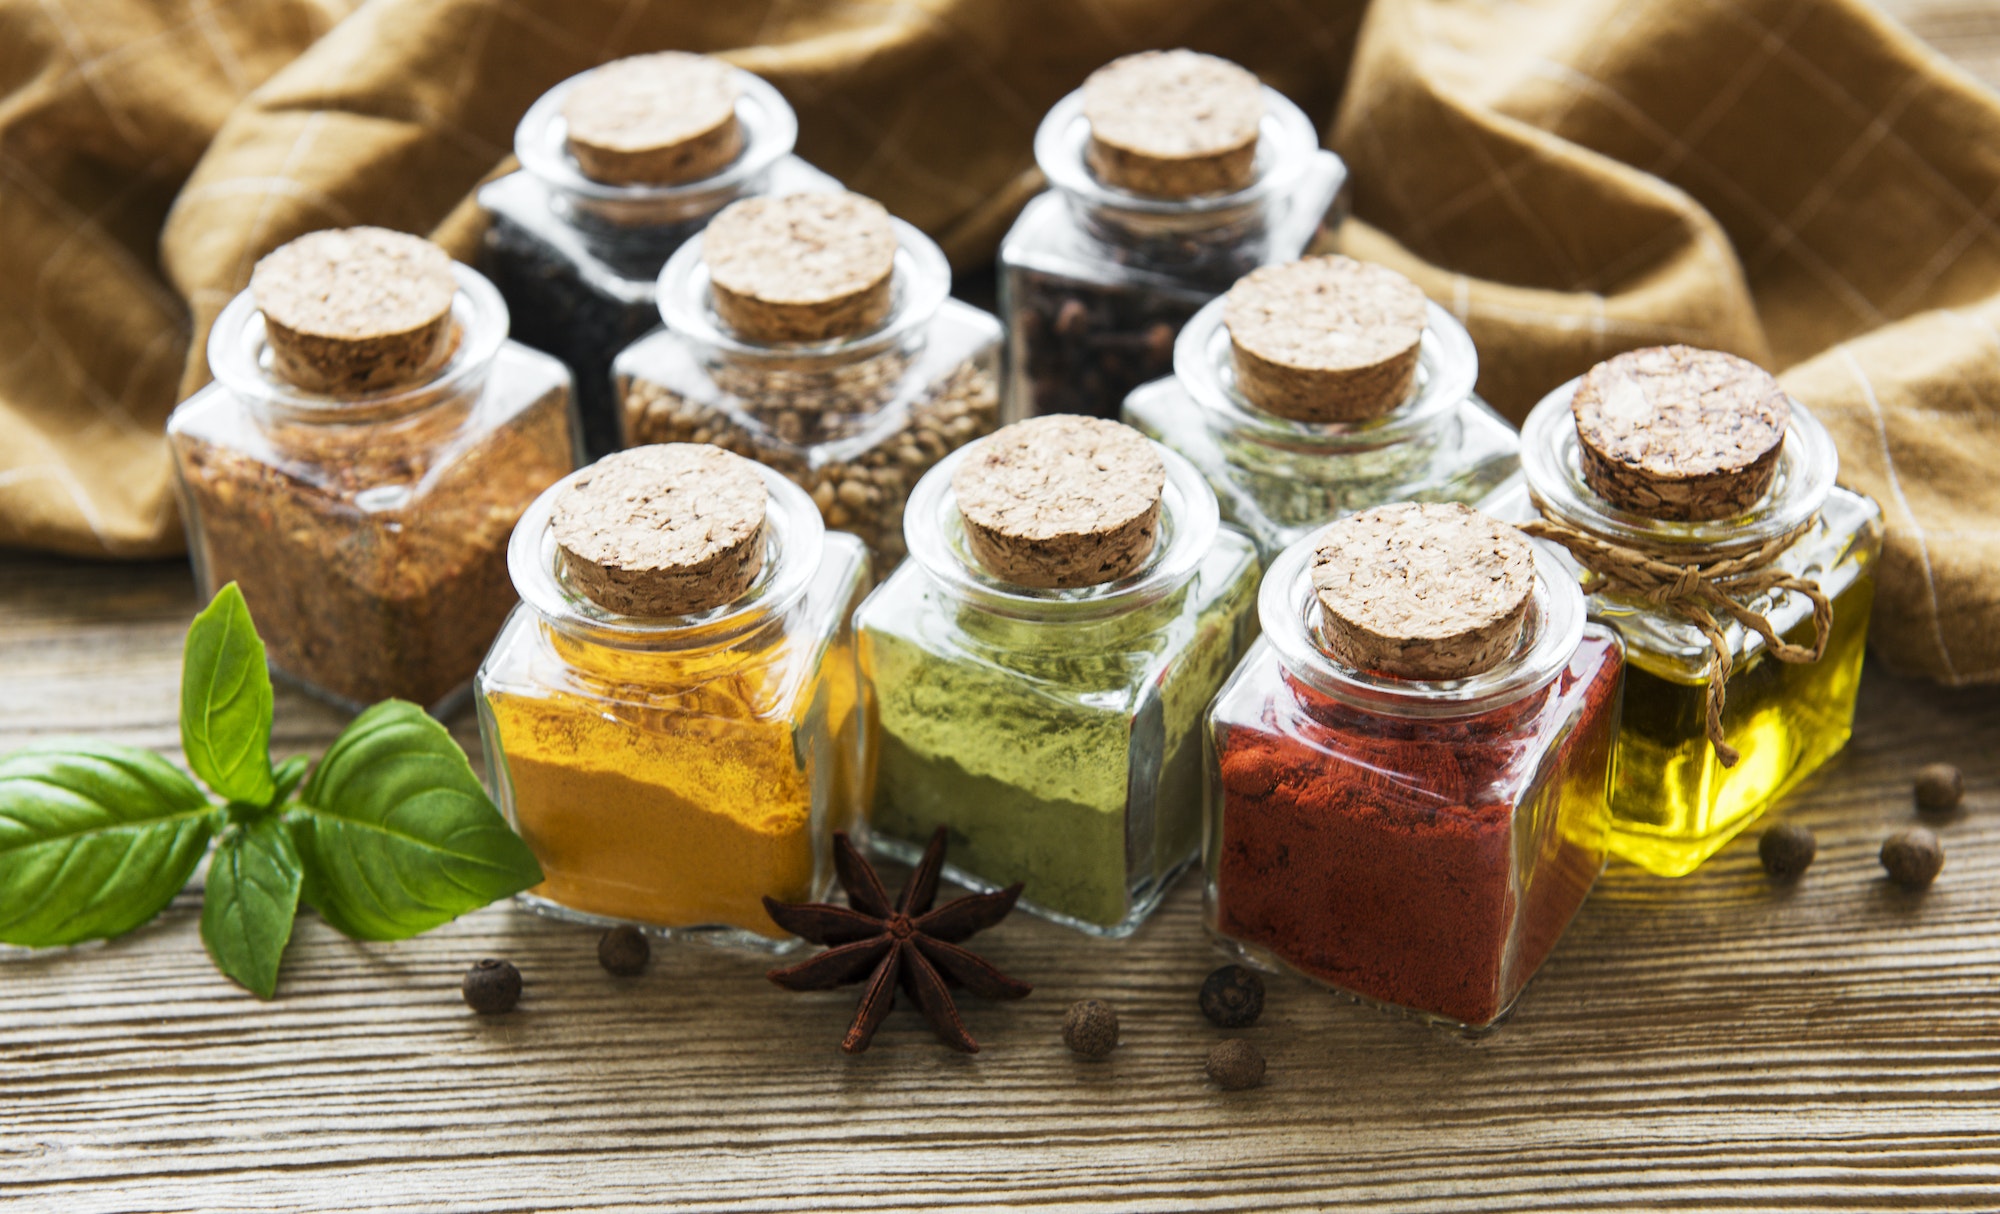 Jars with dried herbs, spices